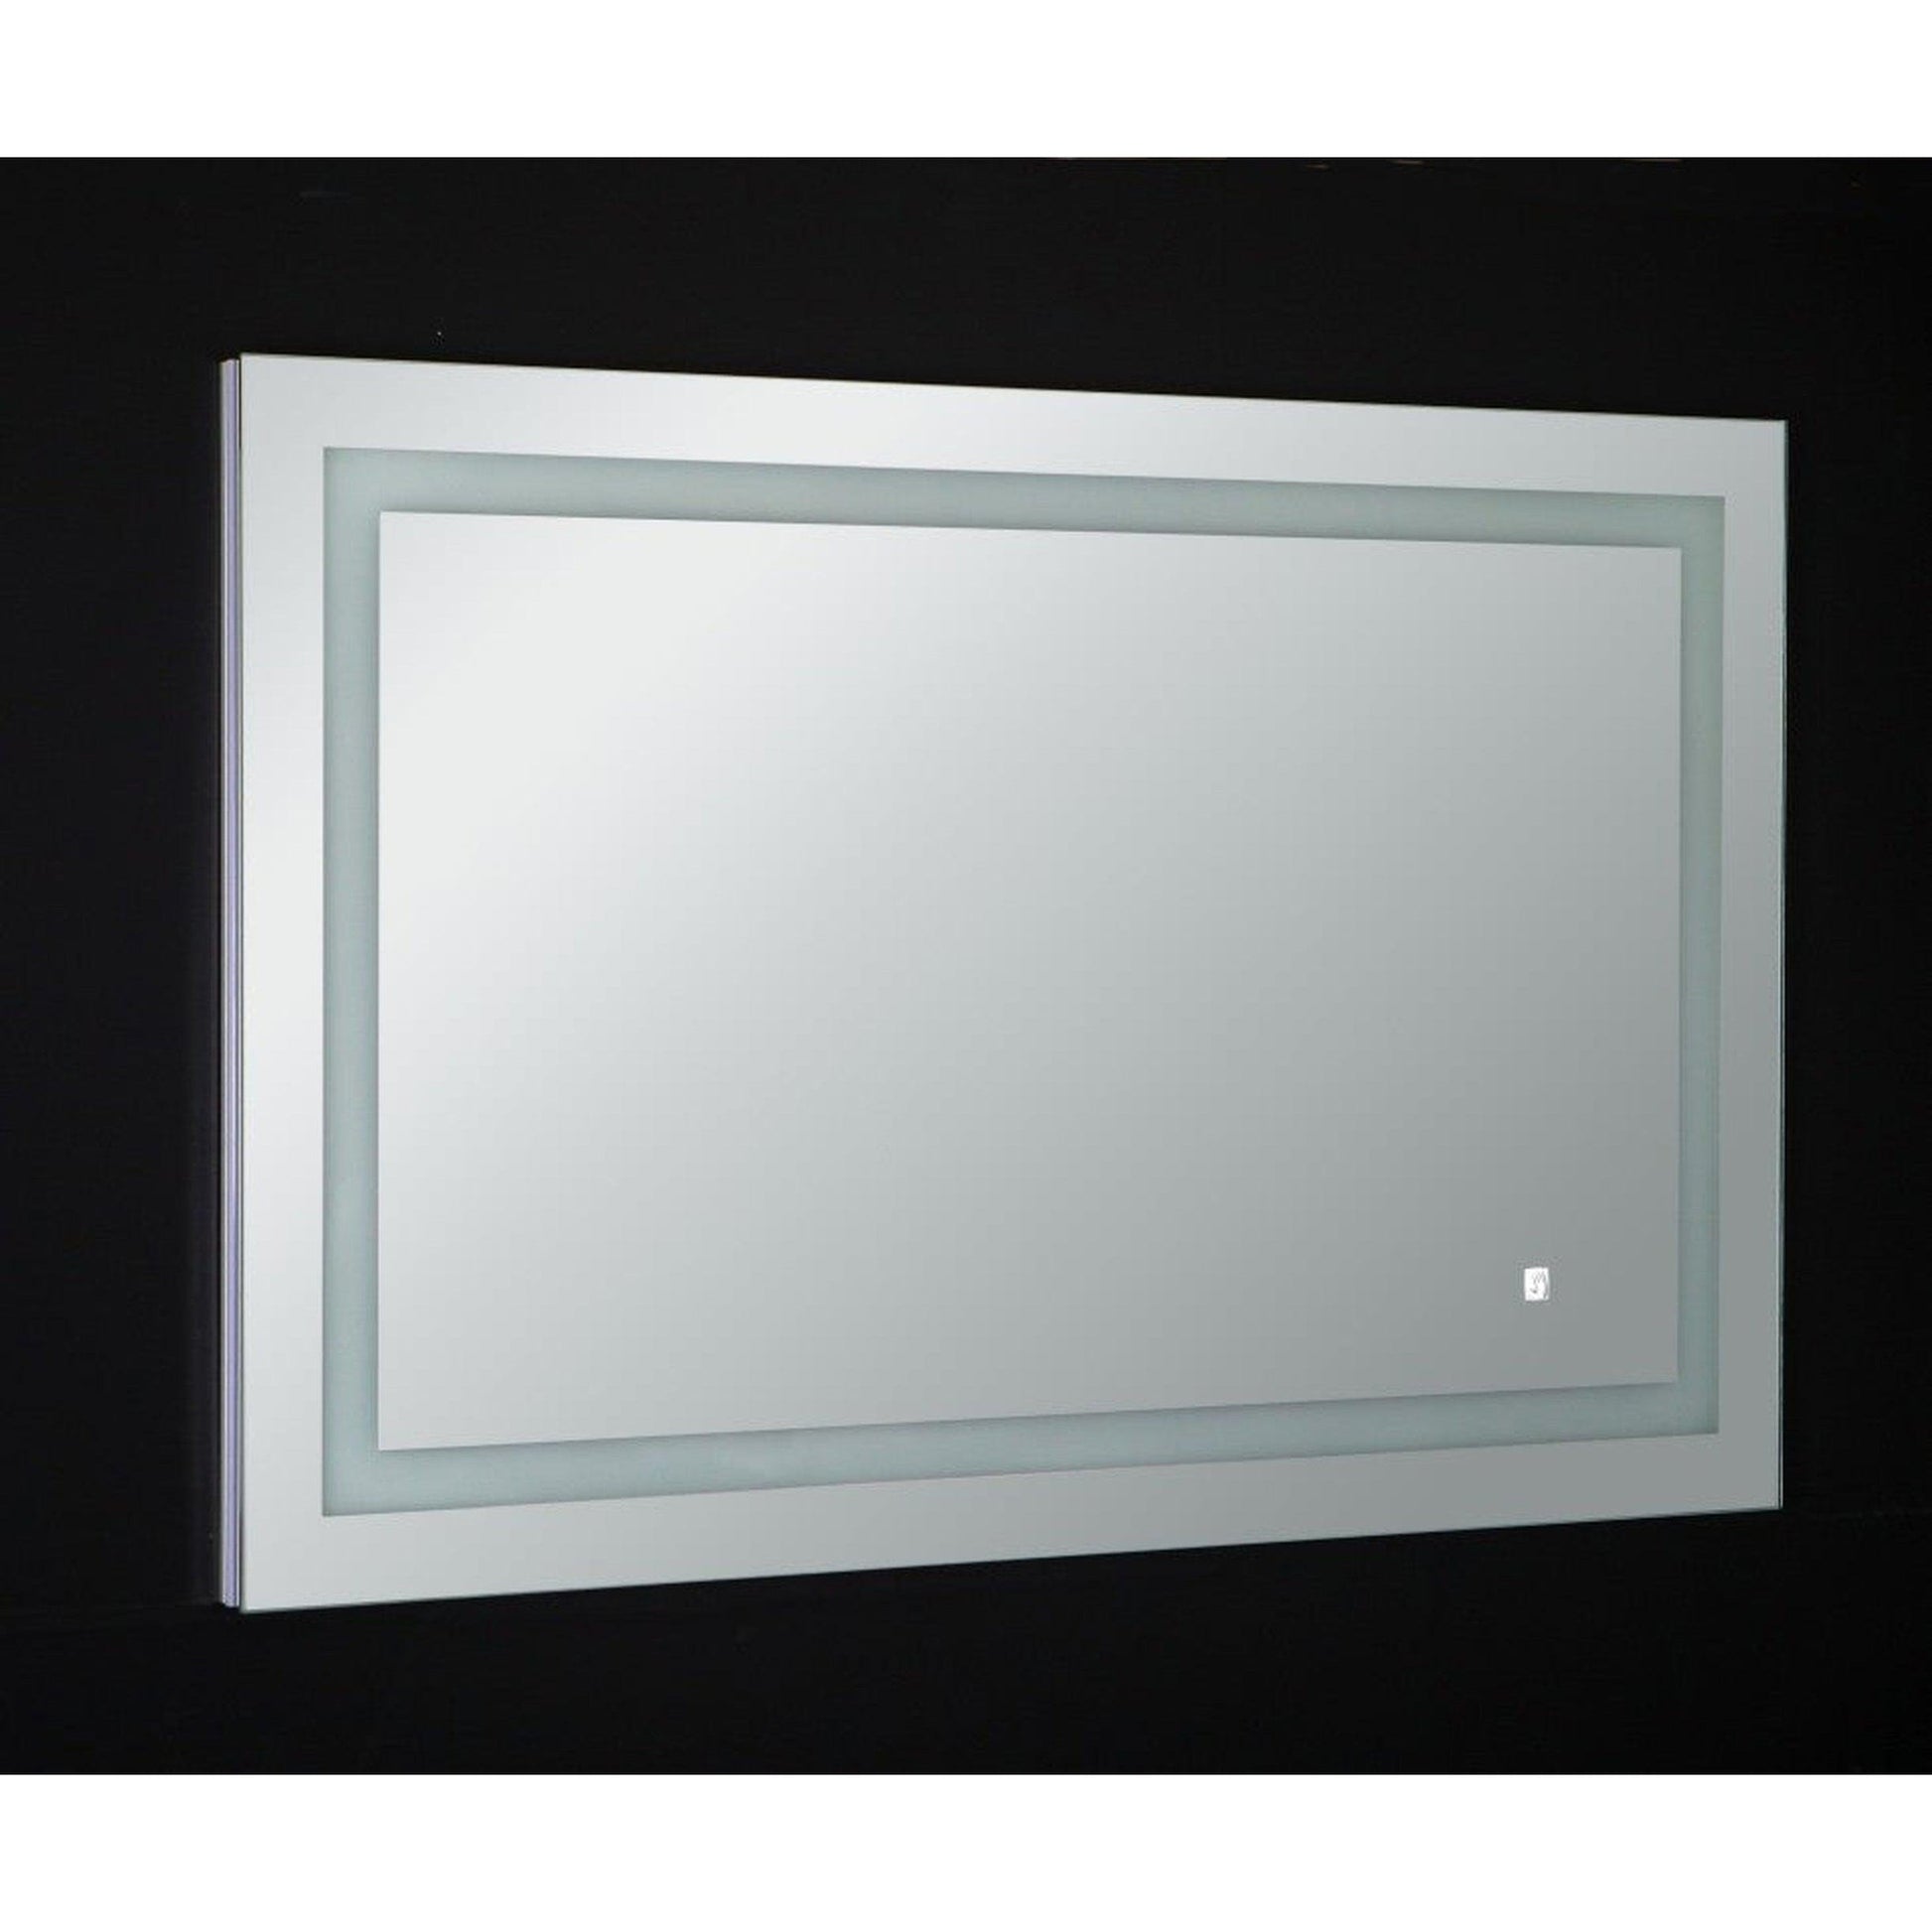 Eviva Deco Piece 42" x 30" Wall Mounted Bathroom Vanity Mirror with Backlit LED and Frame Lights